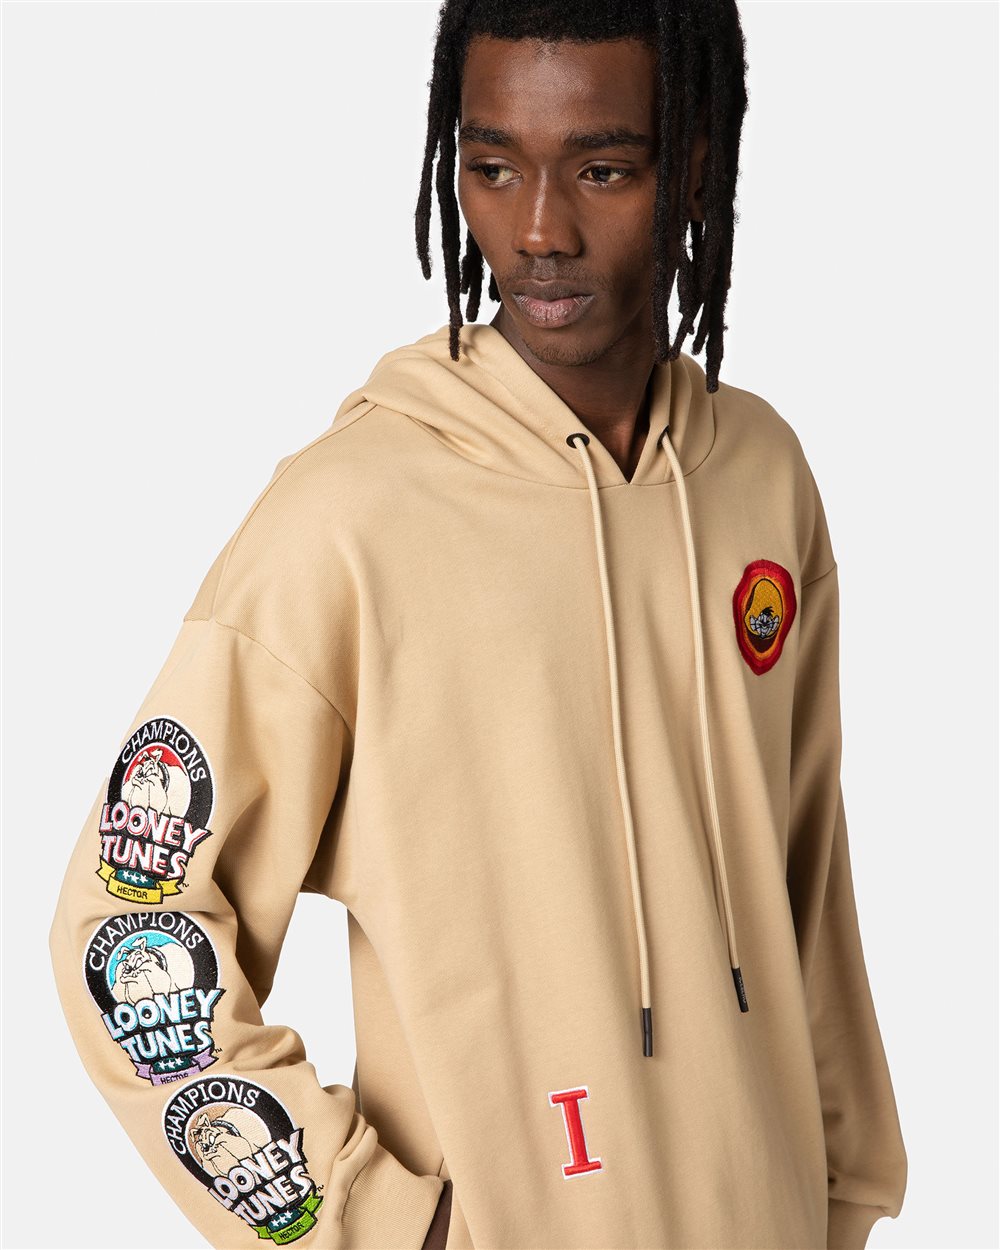 Hooded sweatshirt patches Looney | Iceberg Tunes with